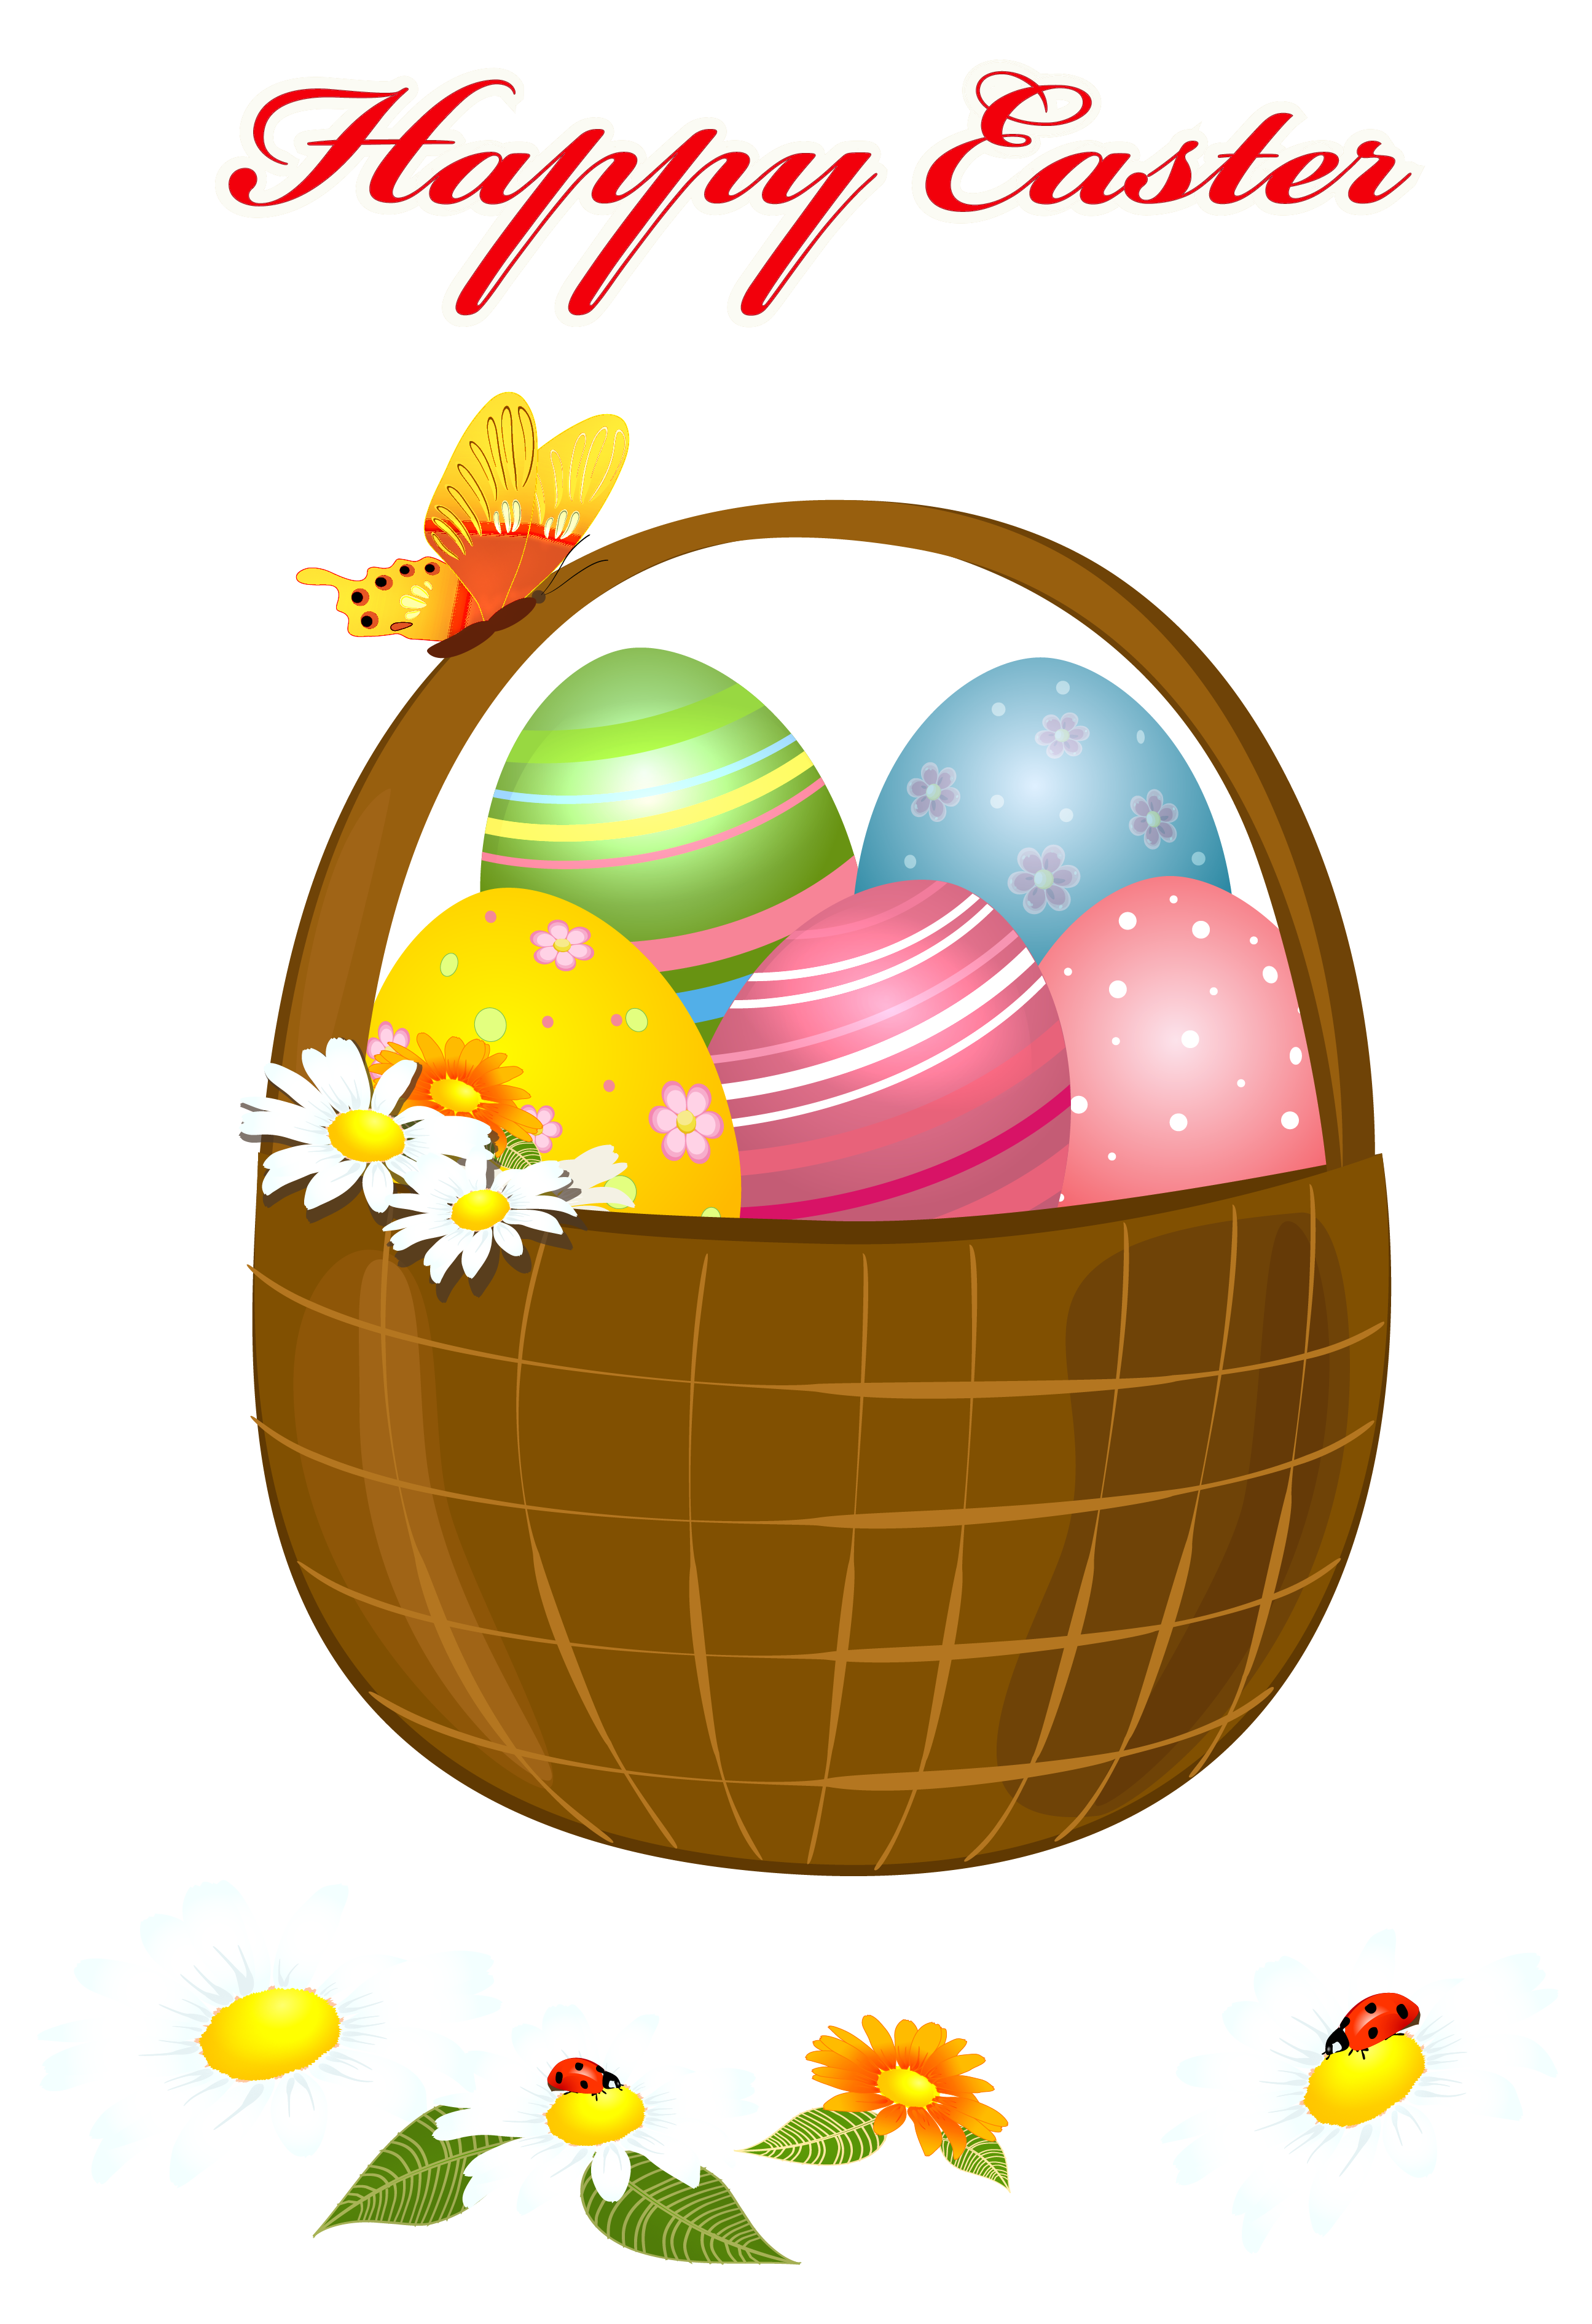 Png picture gallery yopriceville. Clipart happy easter basket